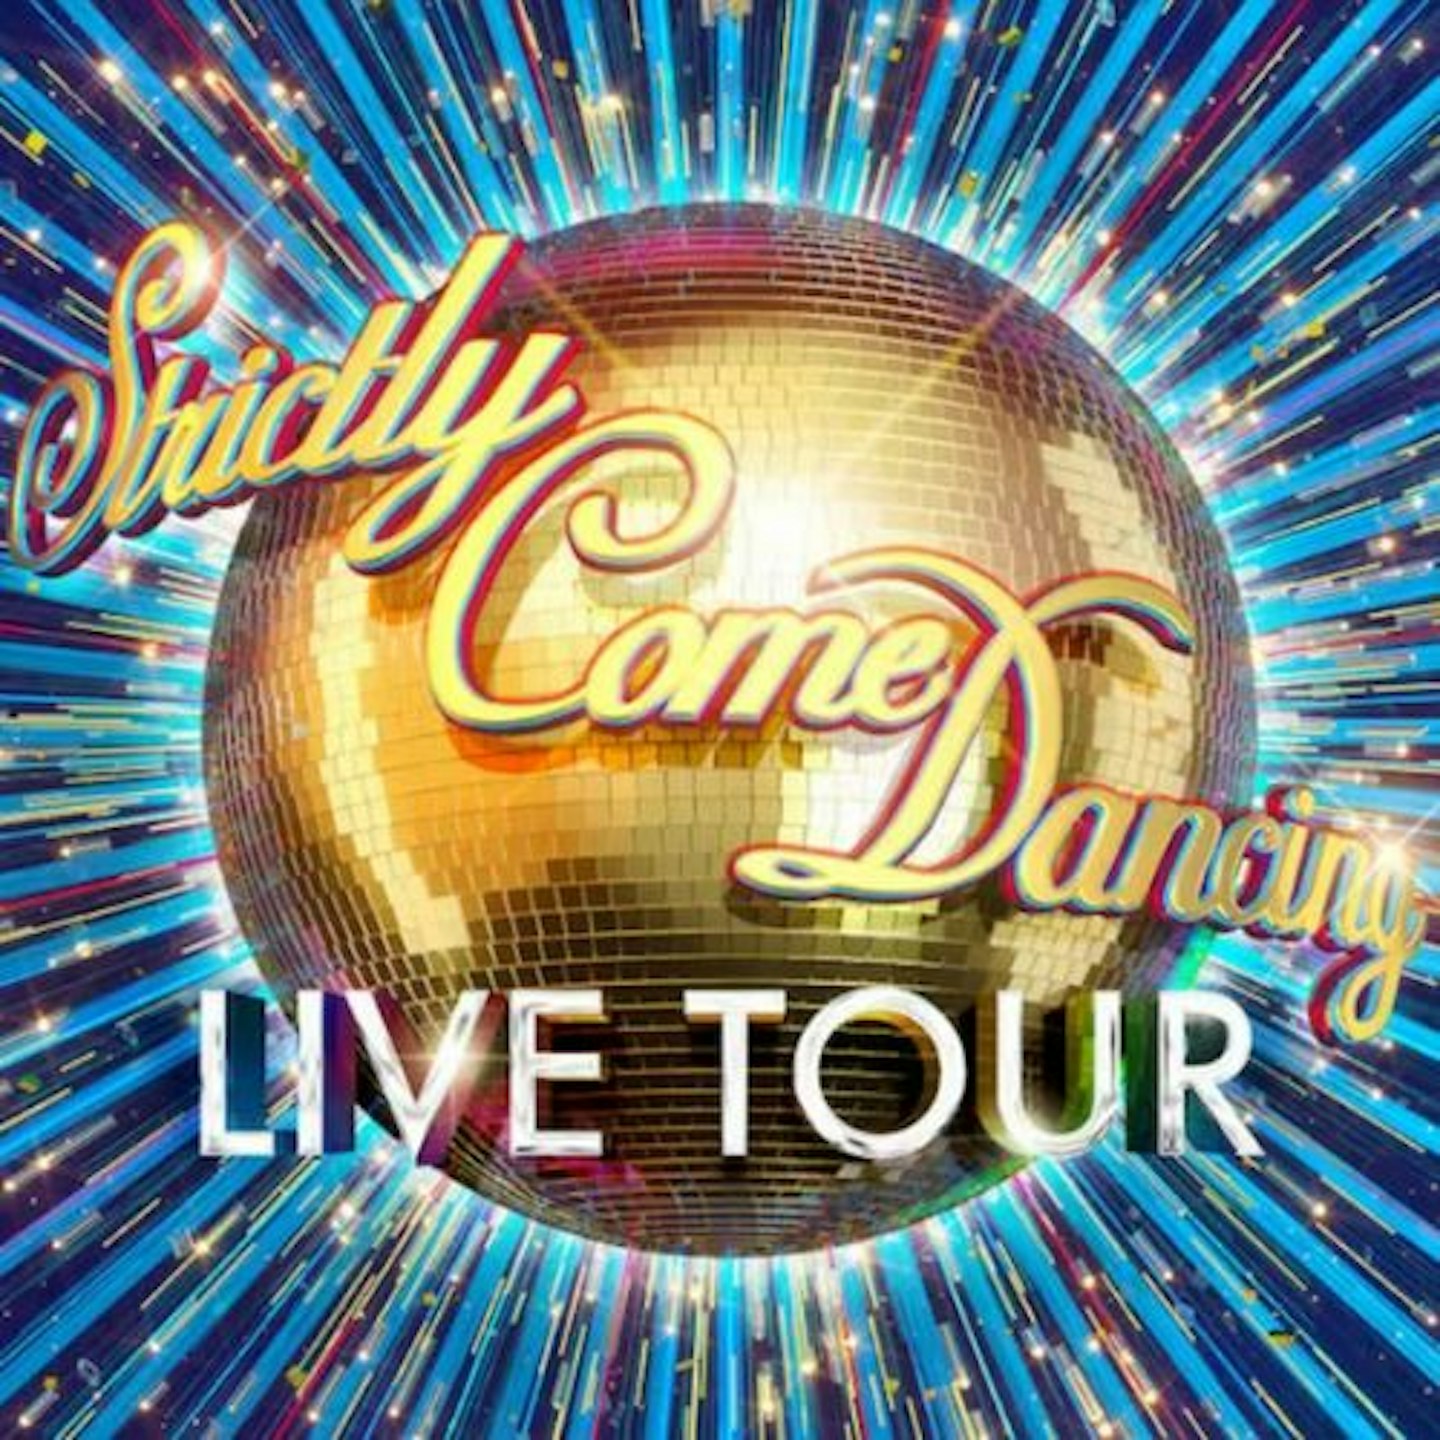 Strictly Come Dancing Live Tour Tickets